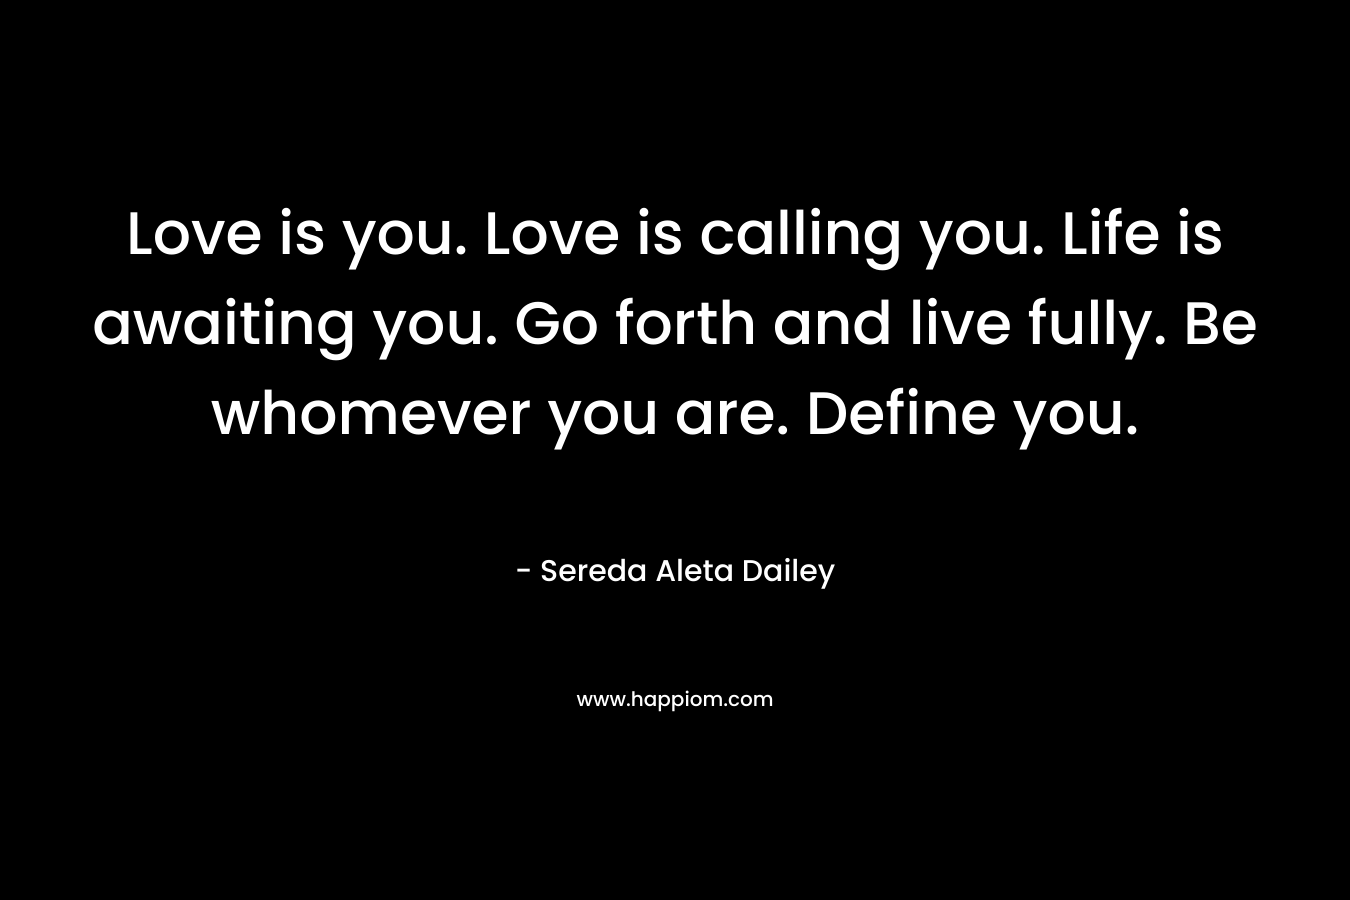 Love is you. Love is calling you. Life is awaiting you. Go forth and live fully. Be whomever you are. Define you. – Sereda Aleta Dailey